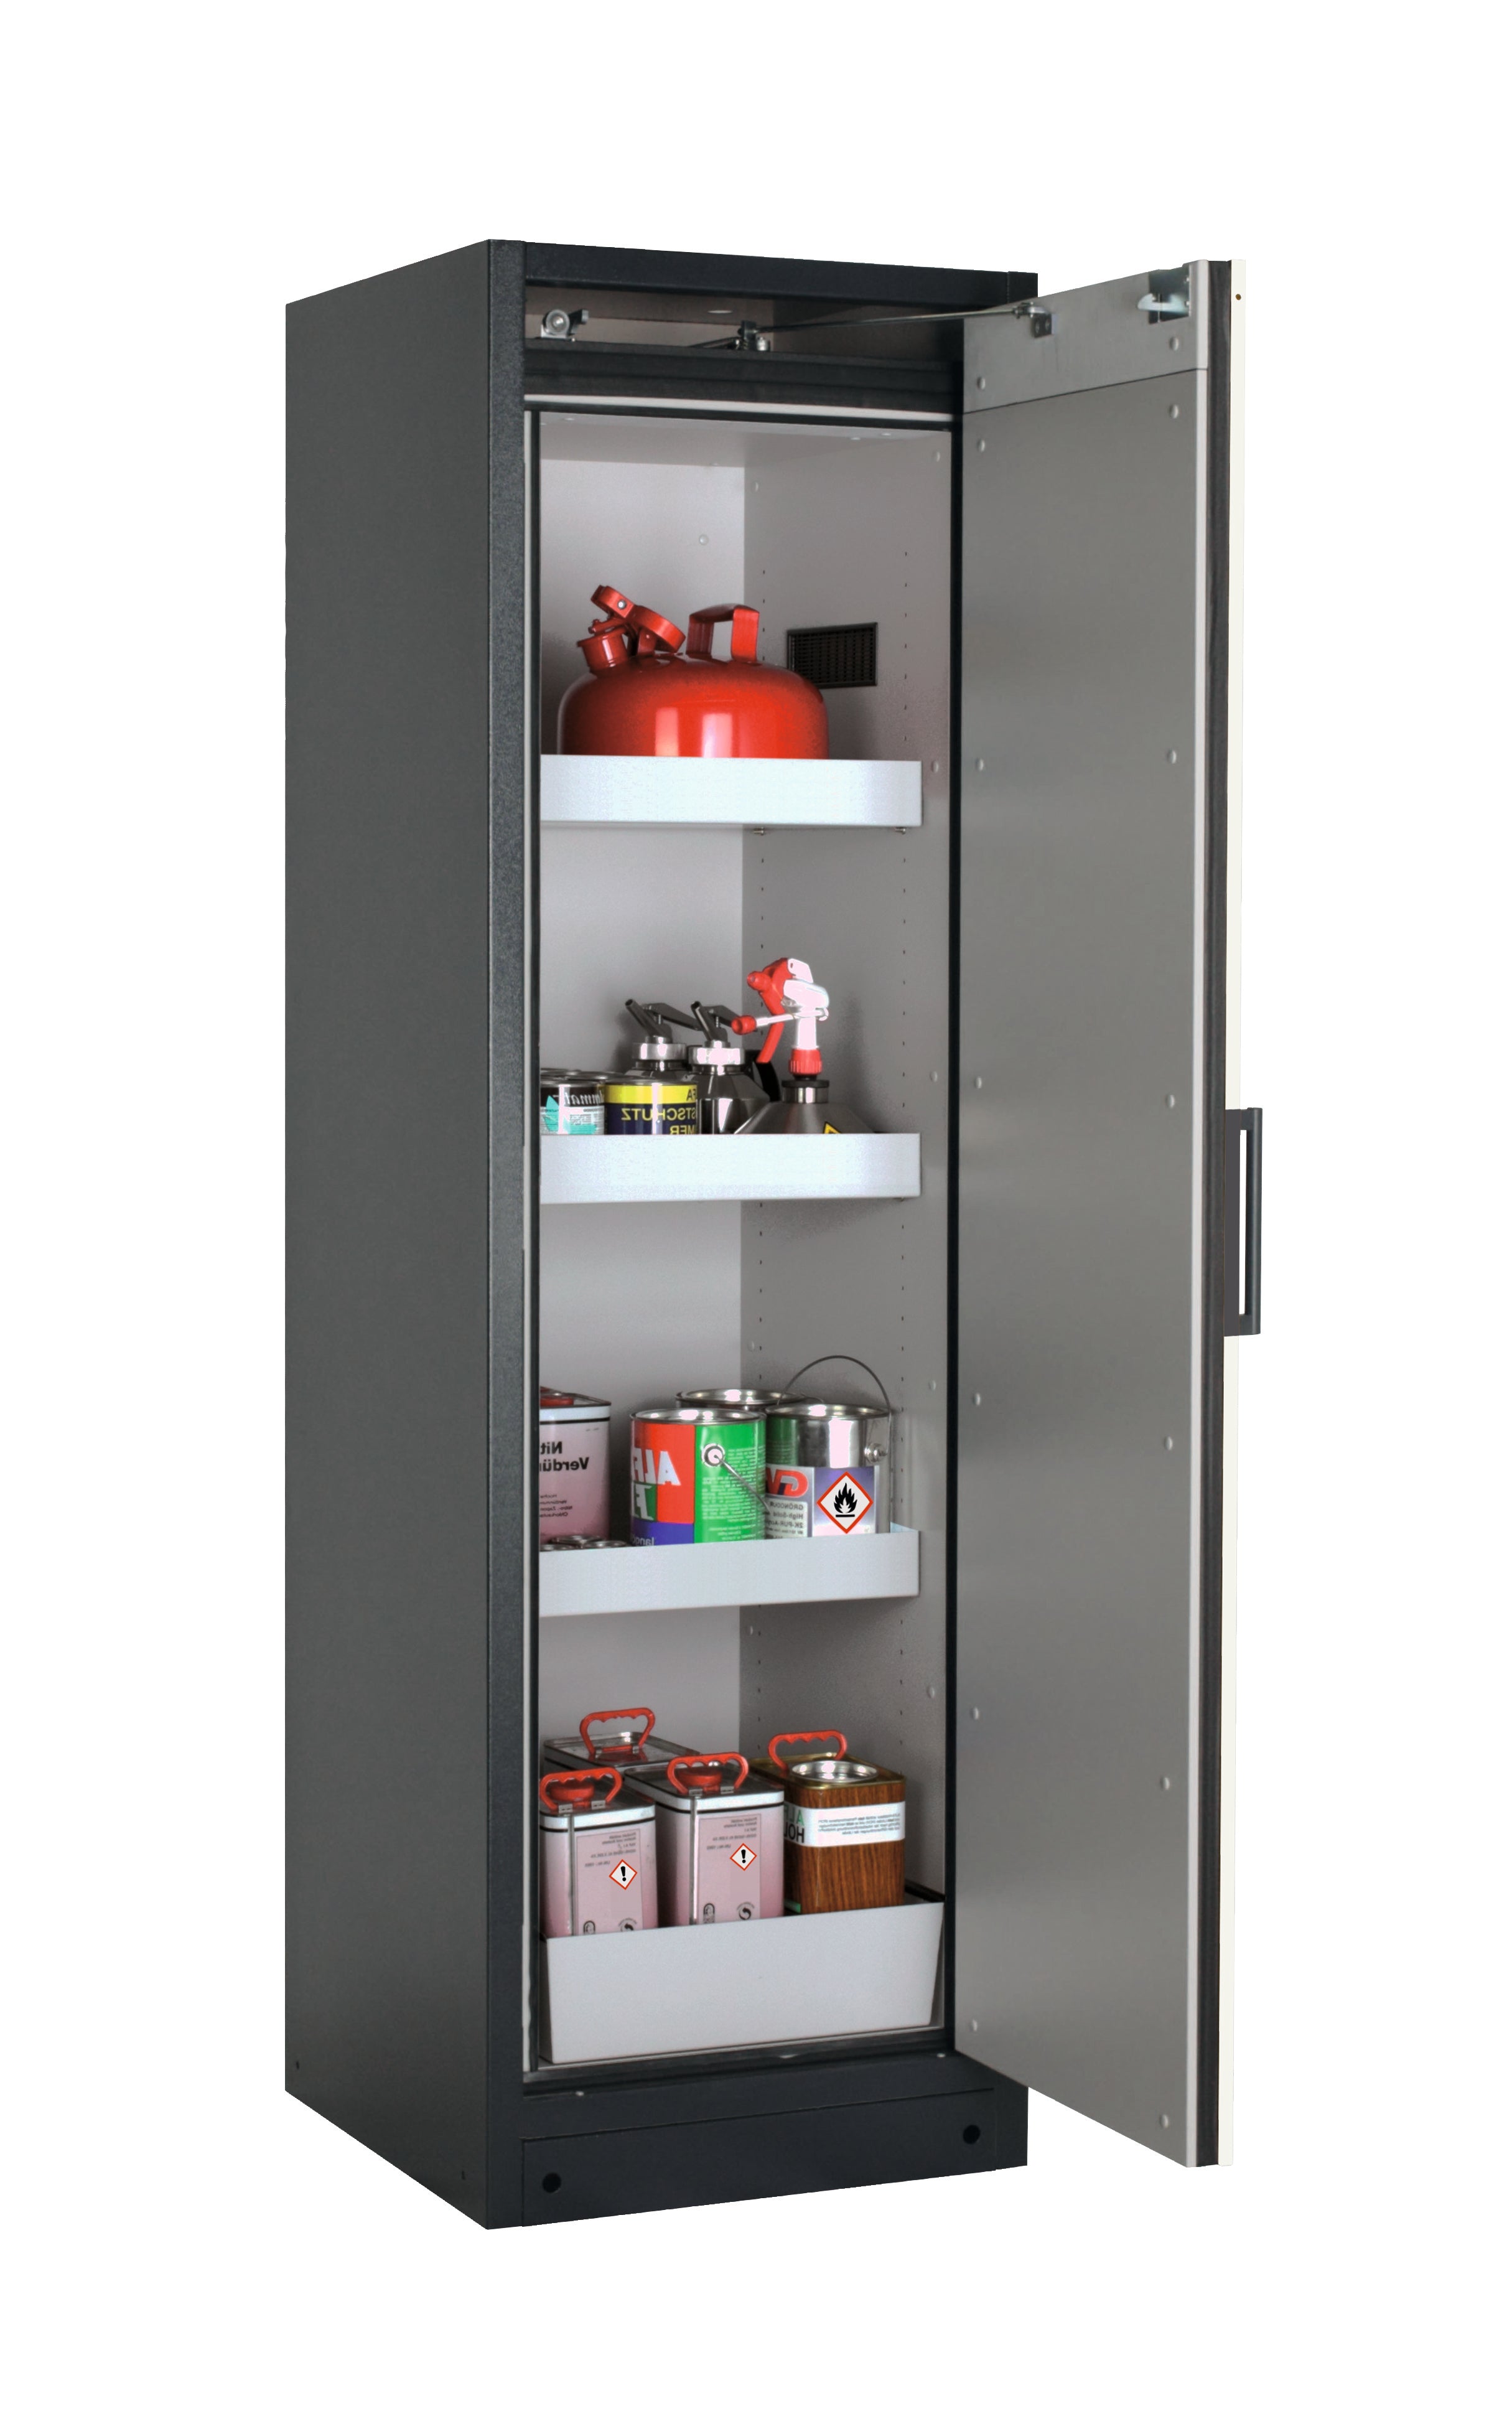 Type 90 safety storage cabinet Q-CLASSIC-90 model Q90.195.060.R in asecos silver with 3x tray shelf (standard) (sheet steel),